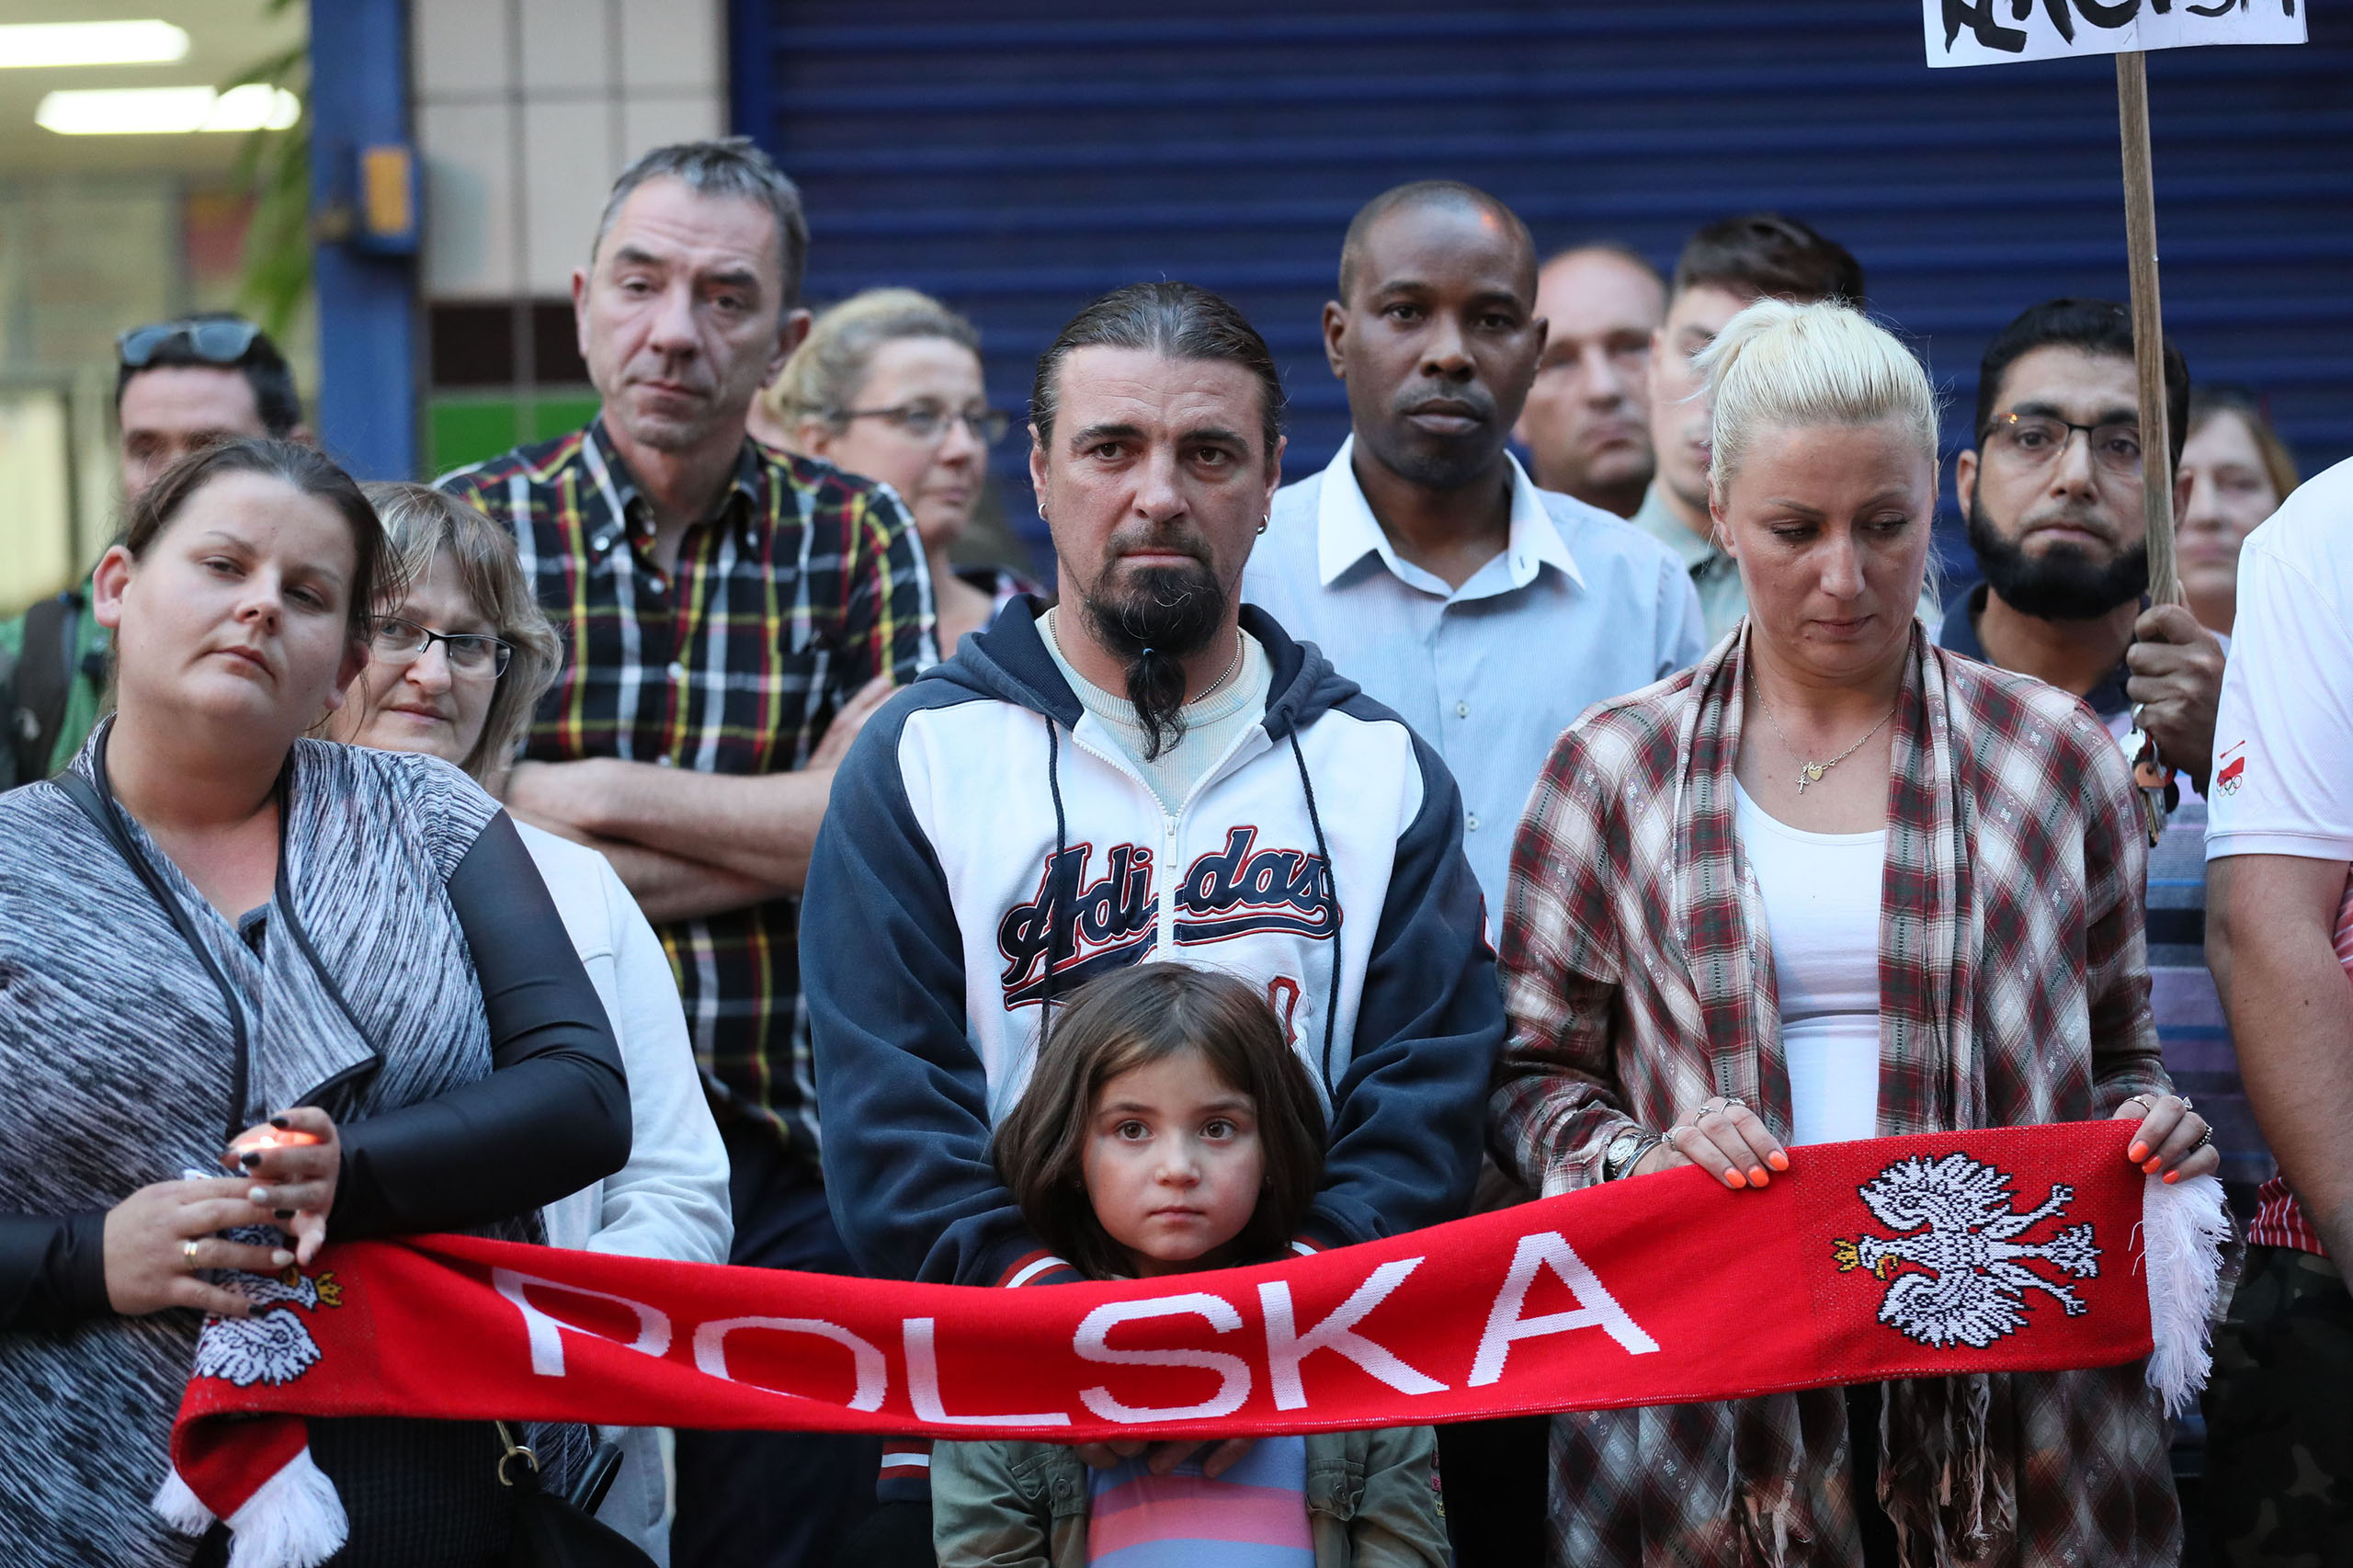 People attend a vigil to pay tribute to Arkadiusz Jozwik, a Polish man killed in a possible hate crime, in Harlow, Essex on Aug. 31, 2016. (Chris Radburn—PA Wire/AP)